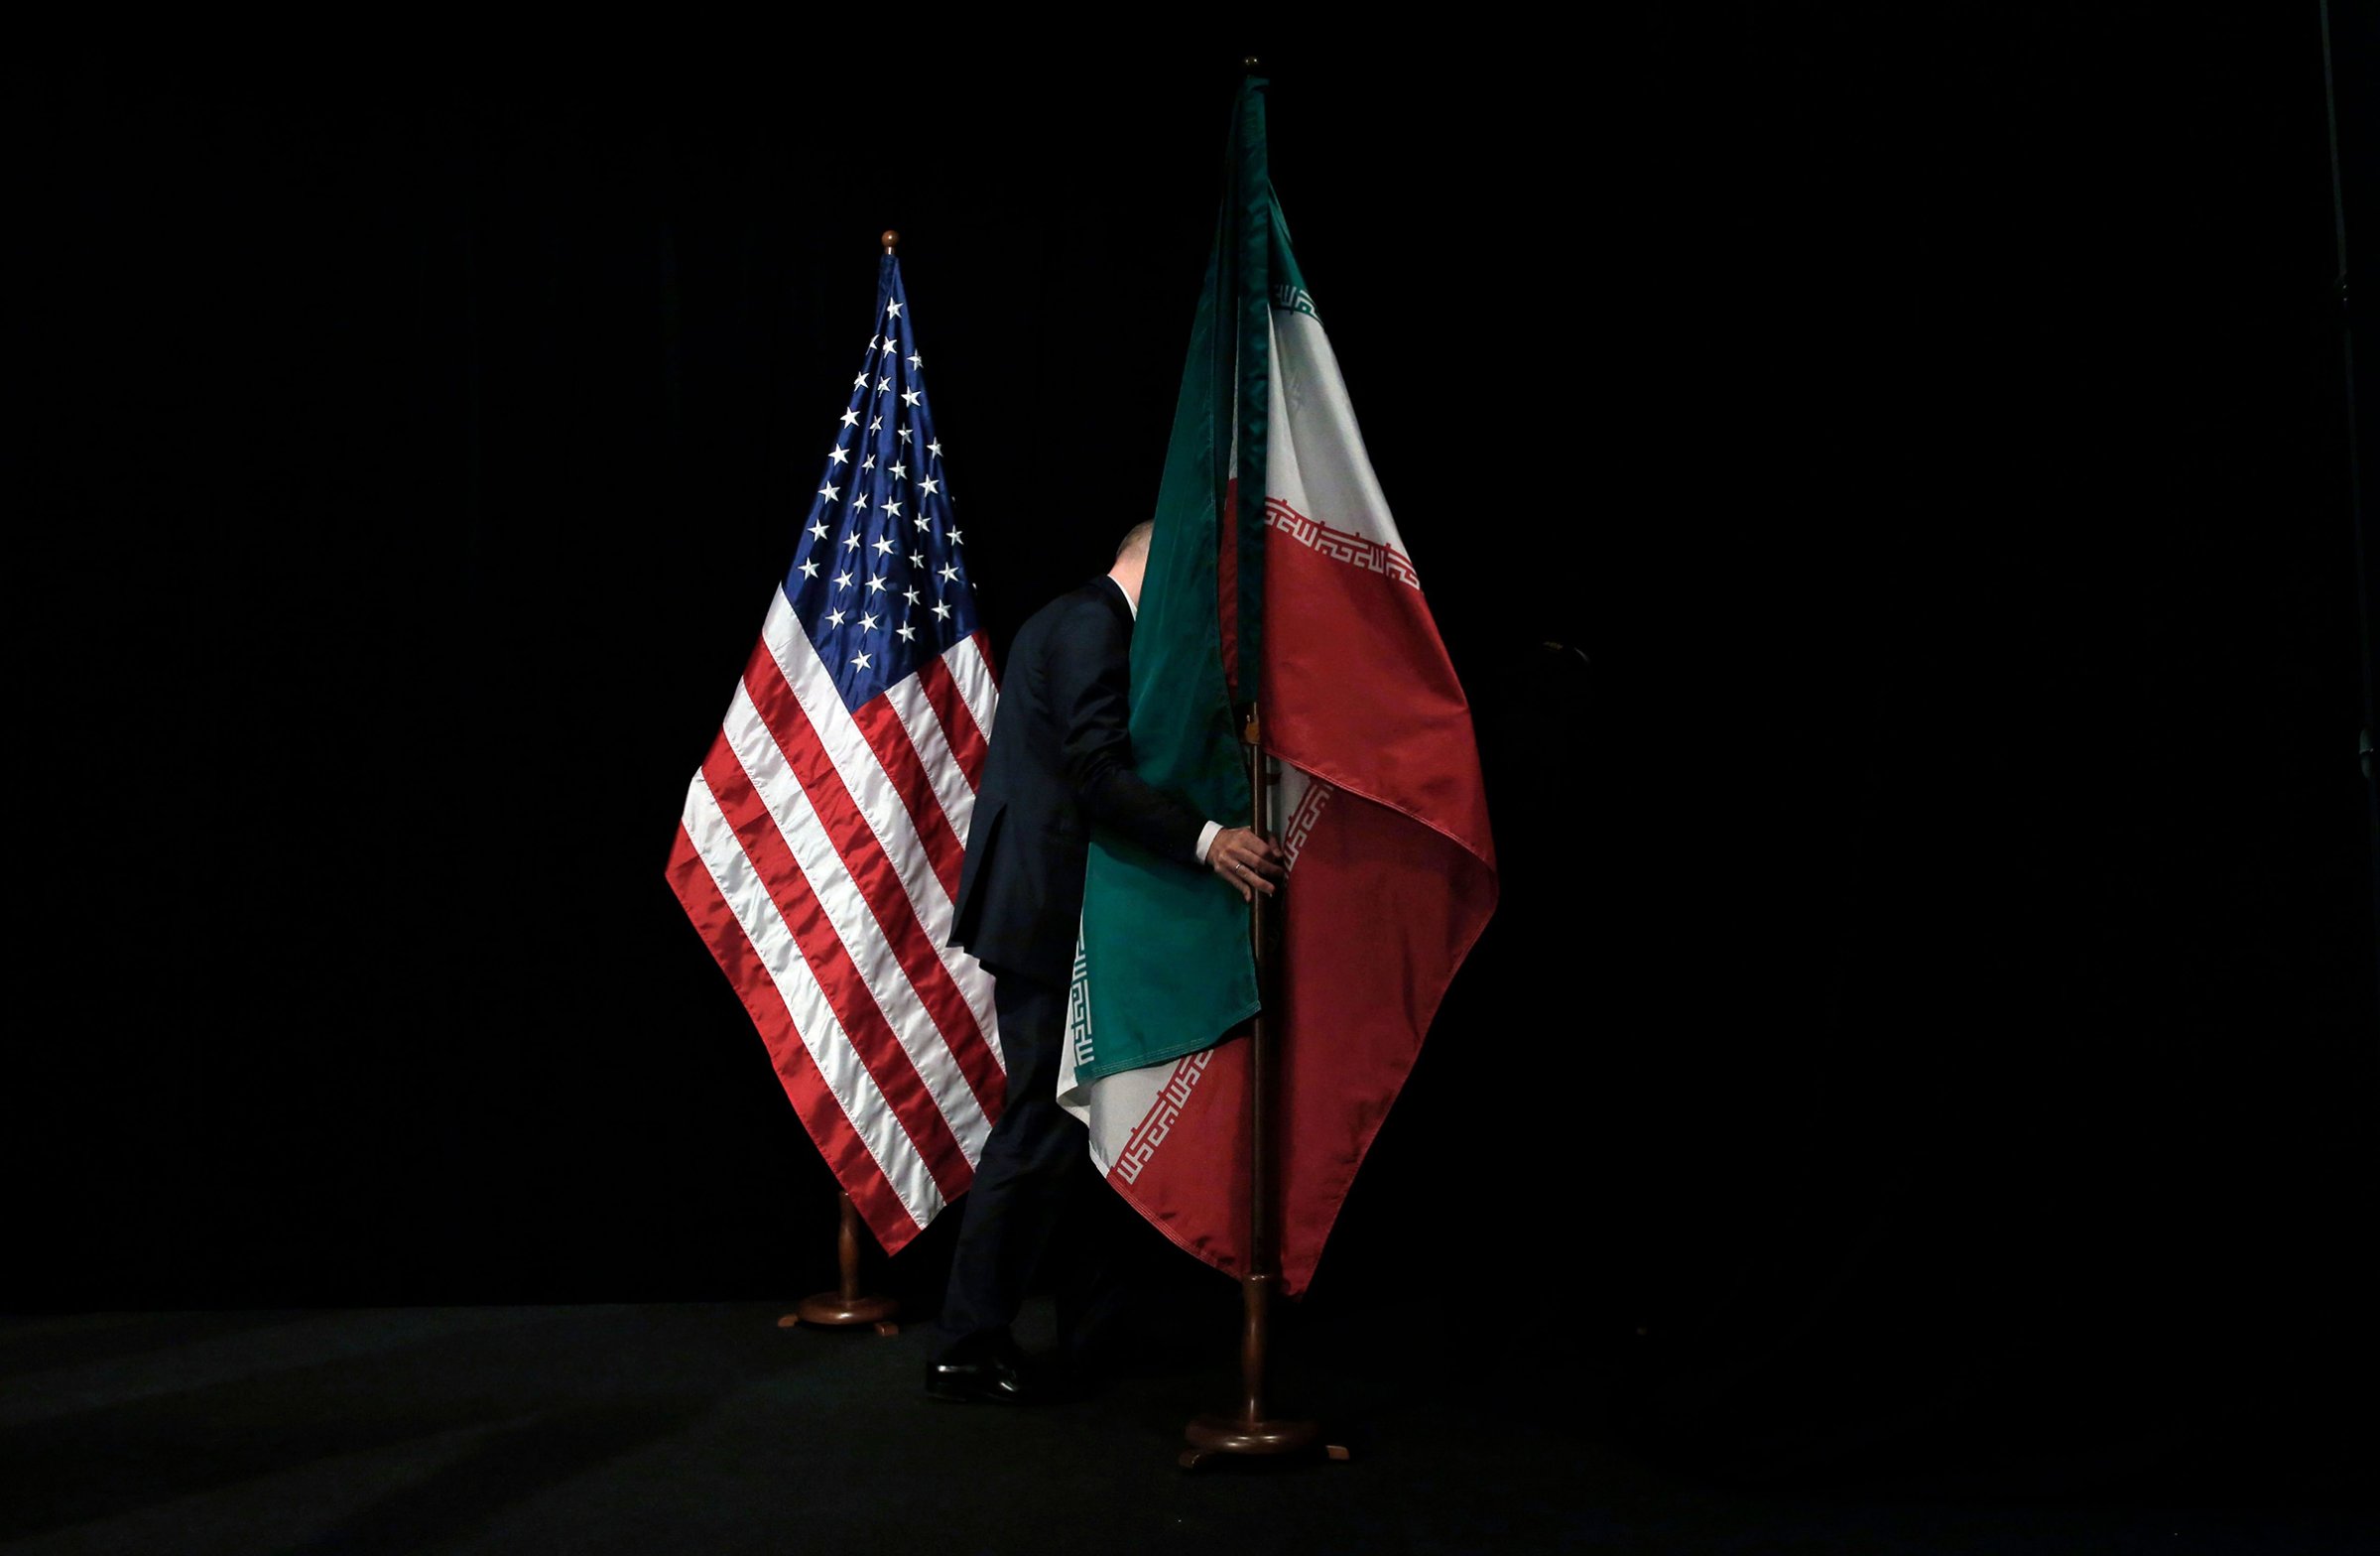 The days of U.S.-Iranian rapprochement, which peaked at this 2015 conference, are long over